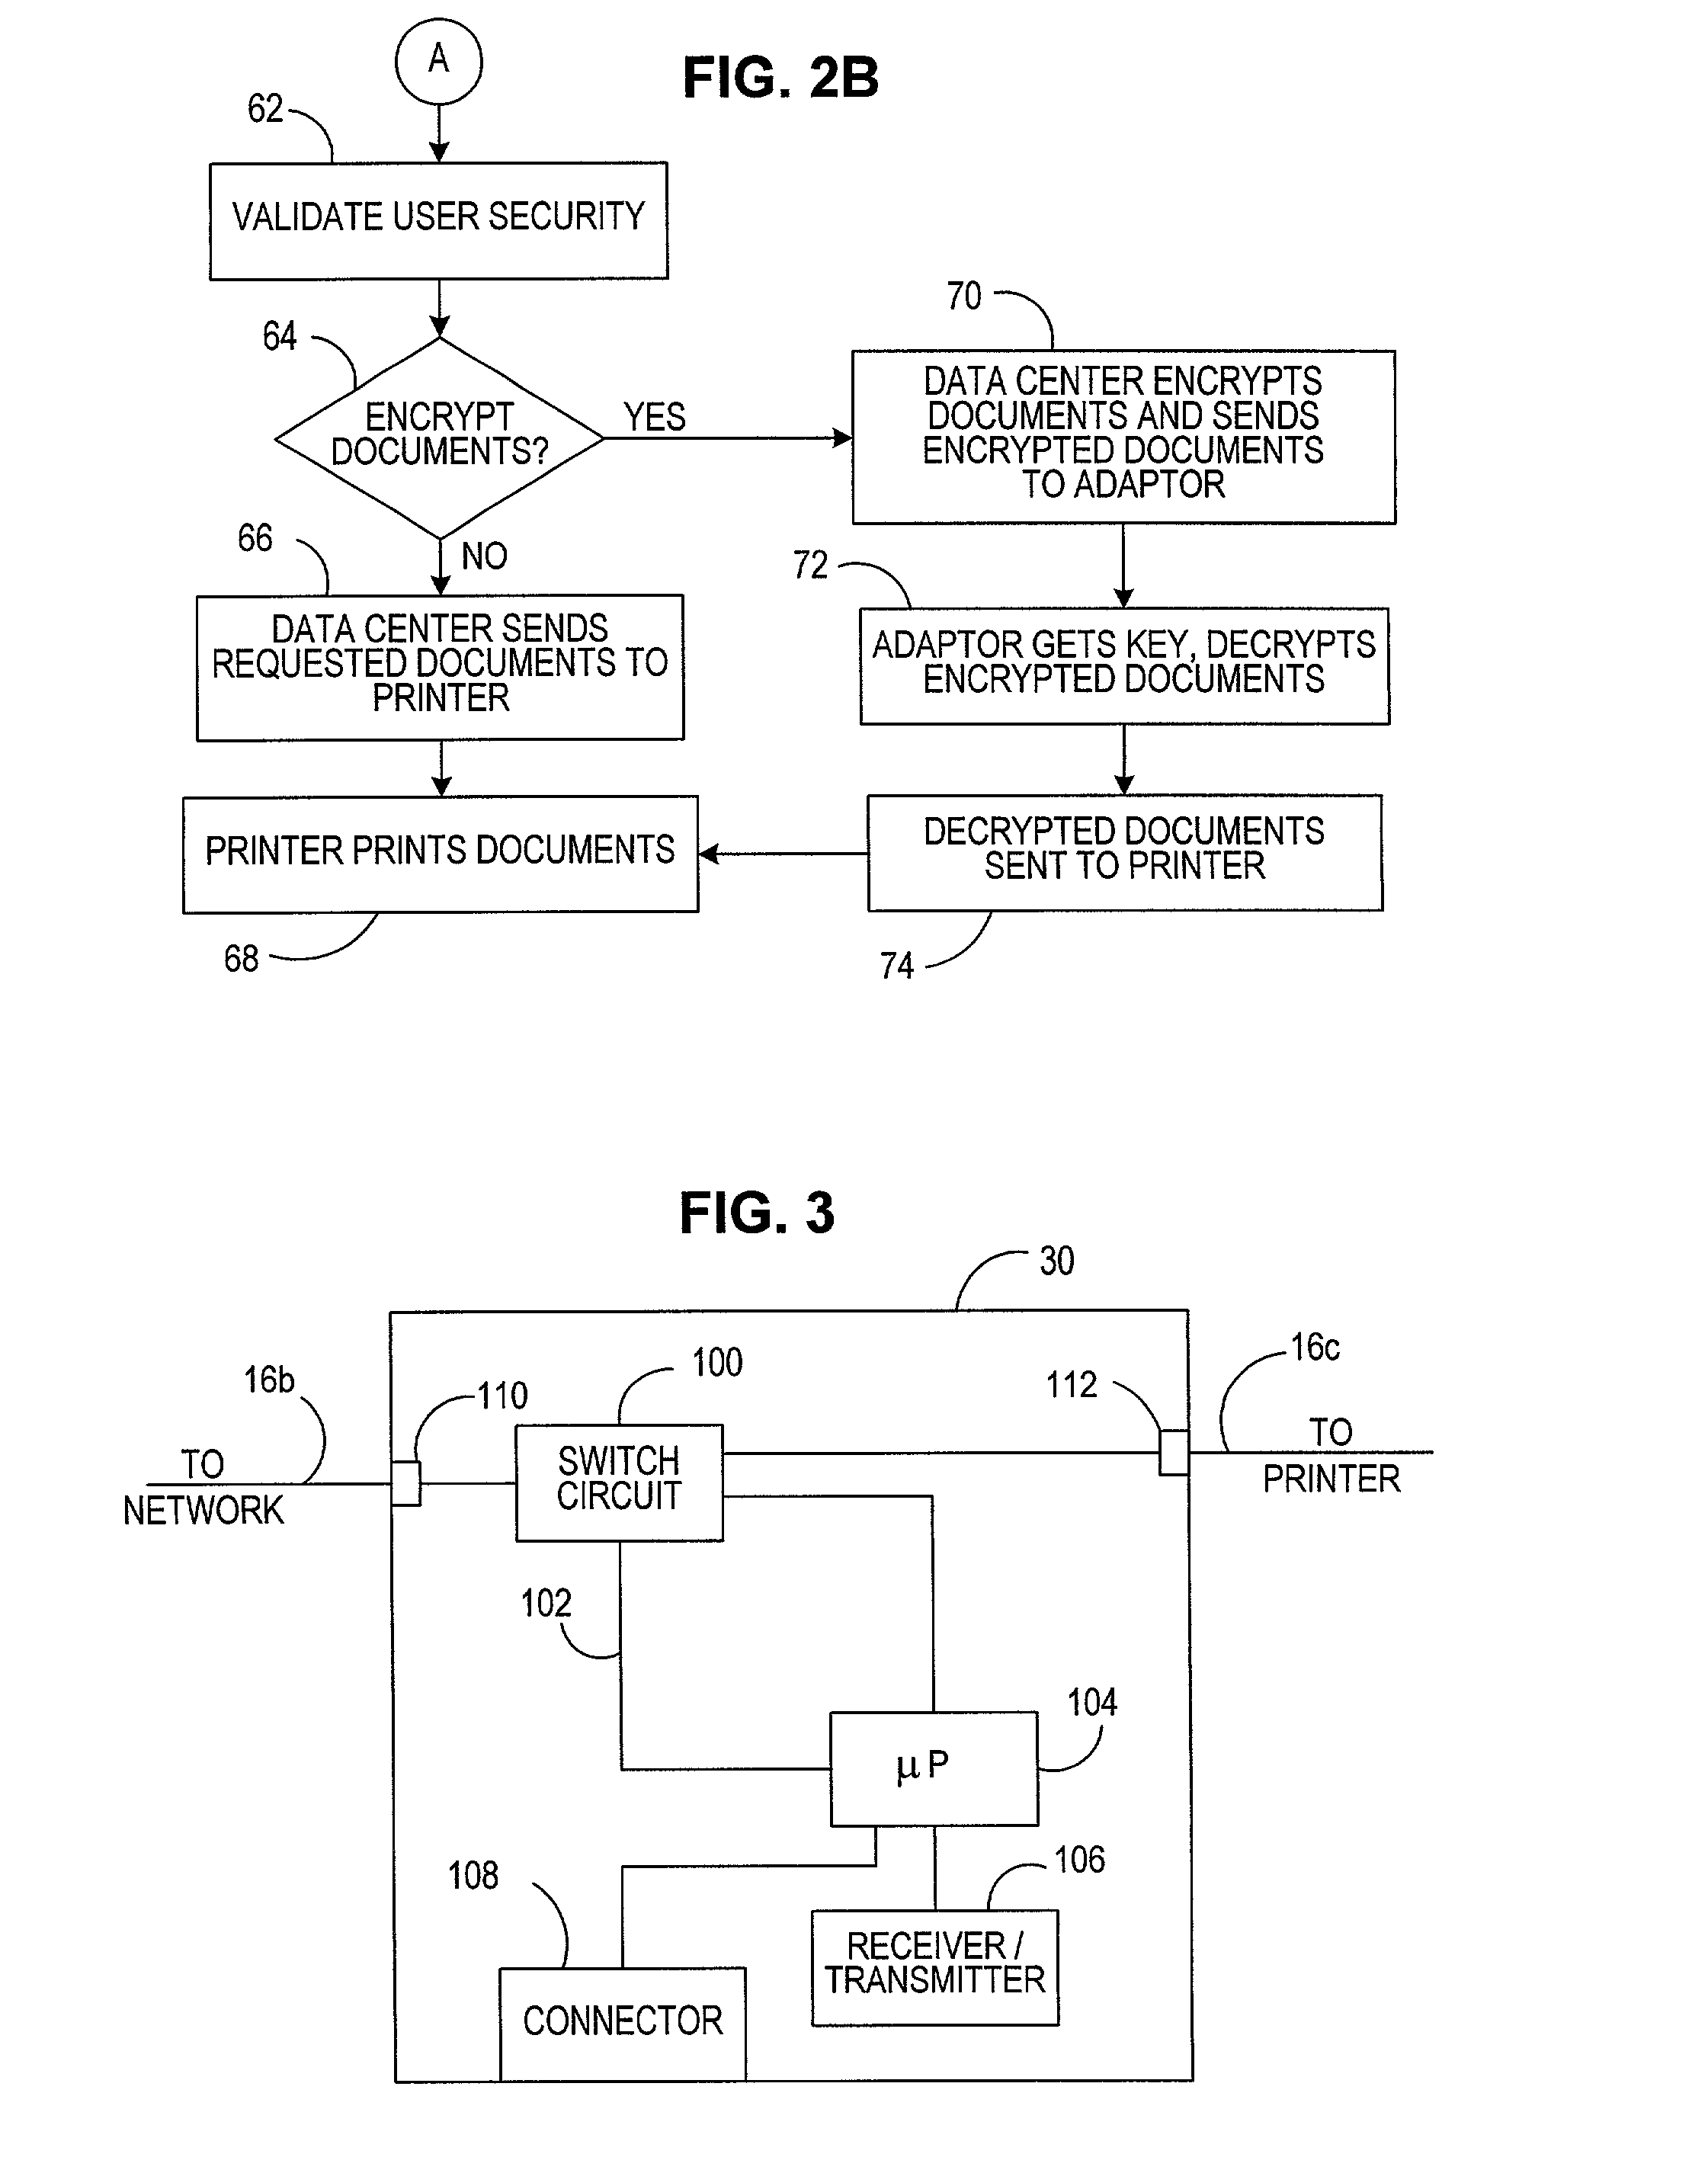 Method and system for secure printing of documents via a printer coupled to the internet